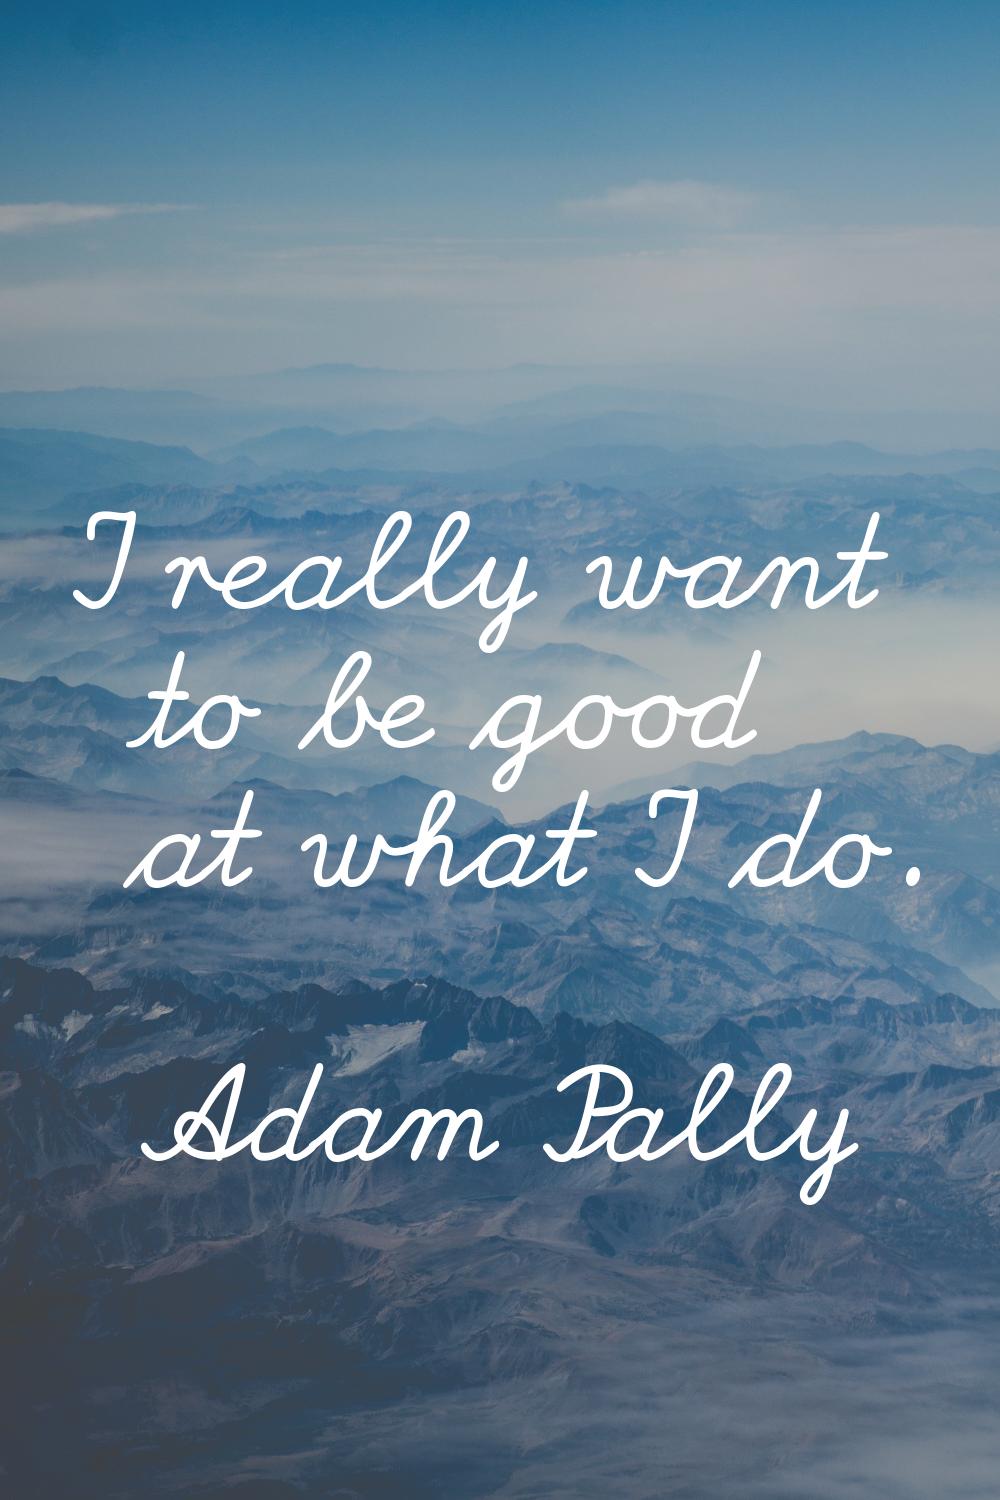 I really want to be good at what I do.